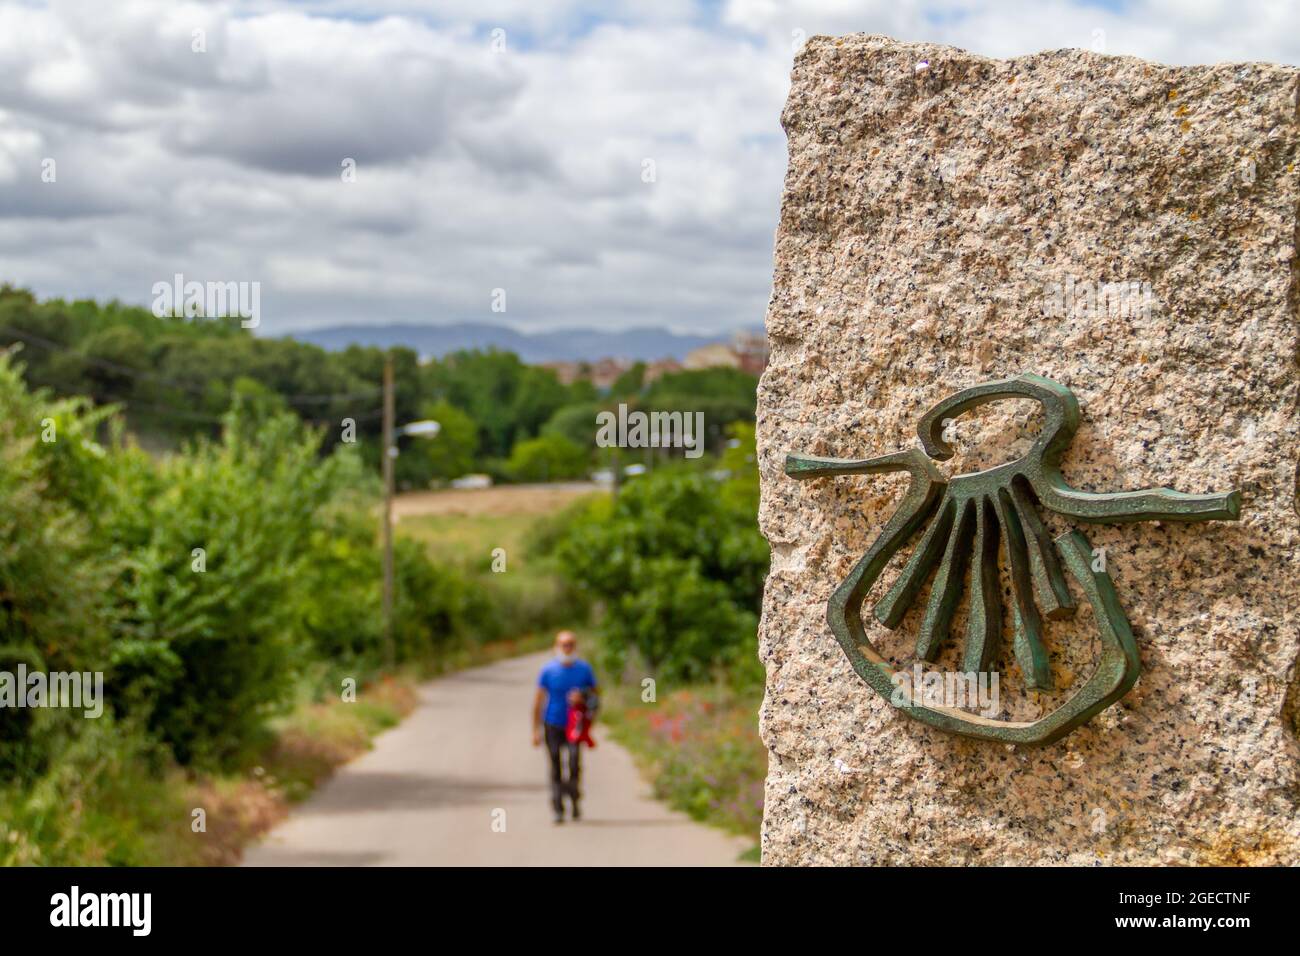 Pilgrim out of focus walks along the Camino de Santiago (Sant James Way) carrying a backpack next to a column on focus with the shell symbol of the Ca Stock Photo